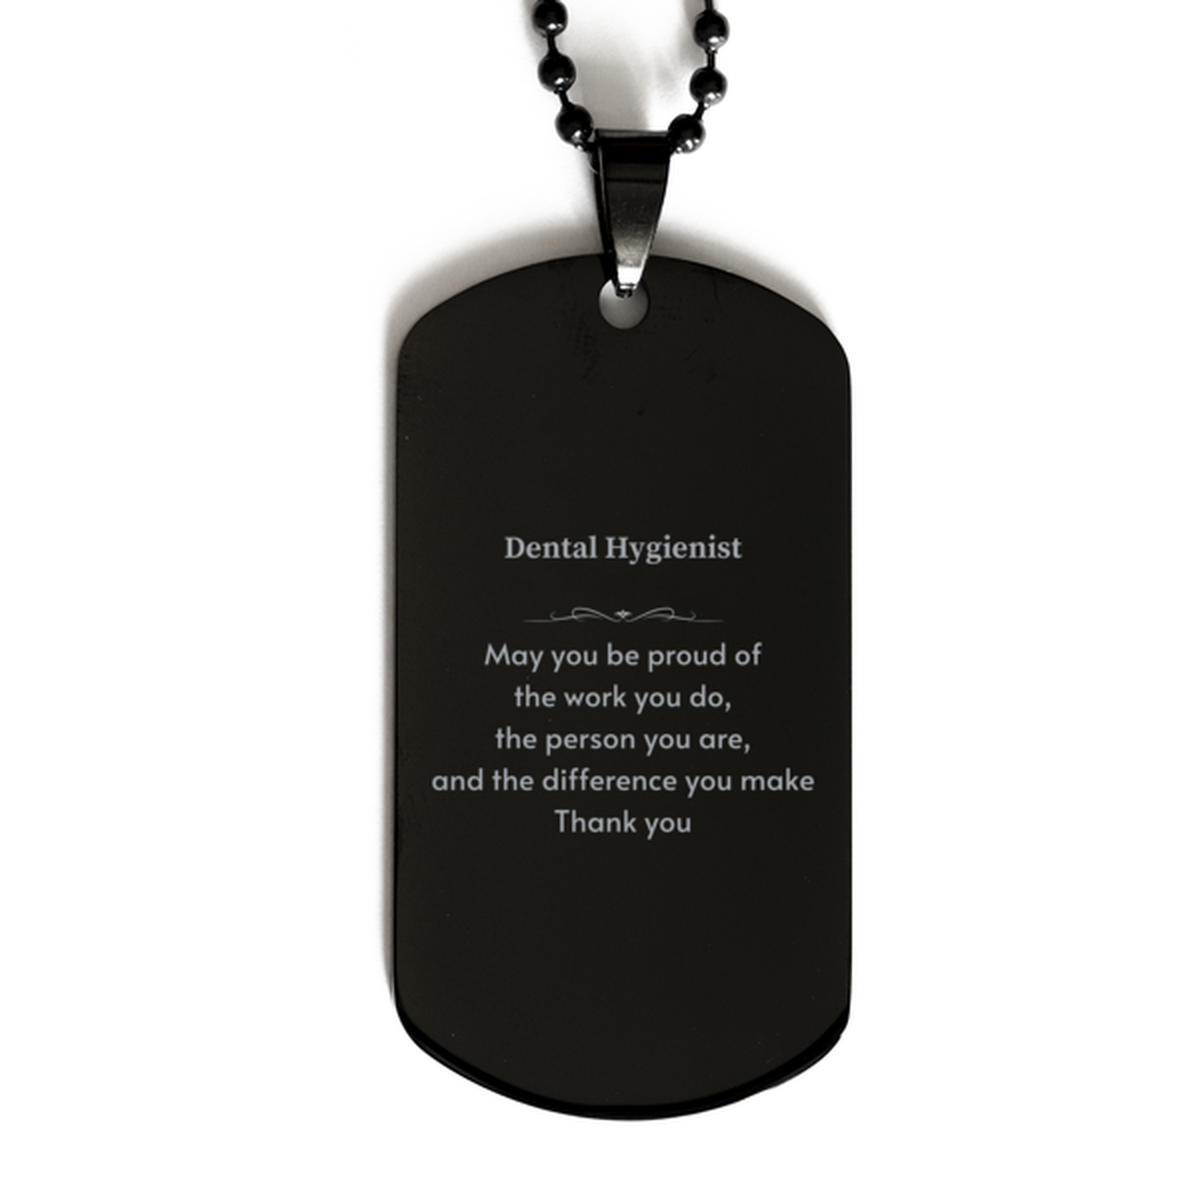 Heartwarming Black Dog Tag Retirement Coworkers Gifts for Dental Hygienist, Dental Hygienist May You be proud of the work you do, the person you are Gifts for Boss Men Women Friends